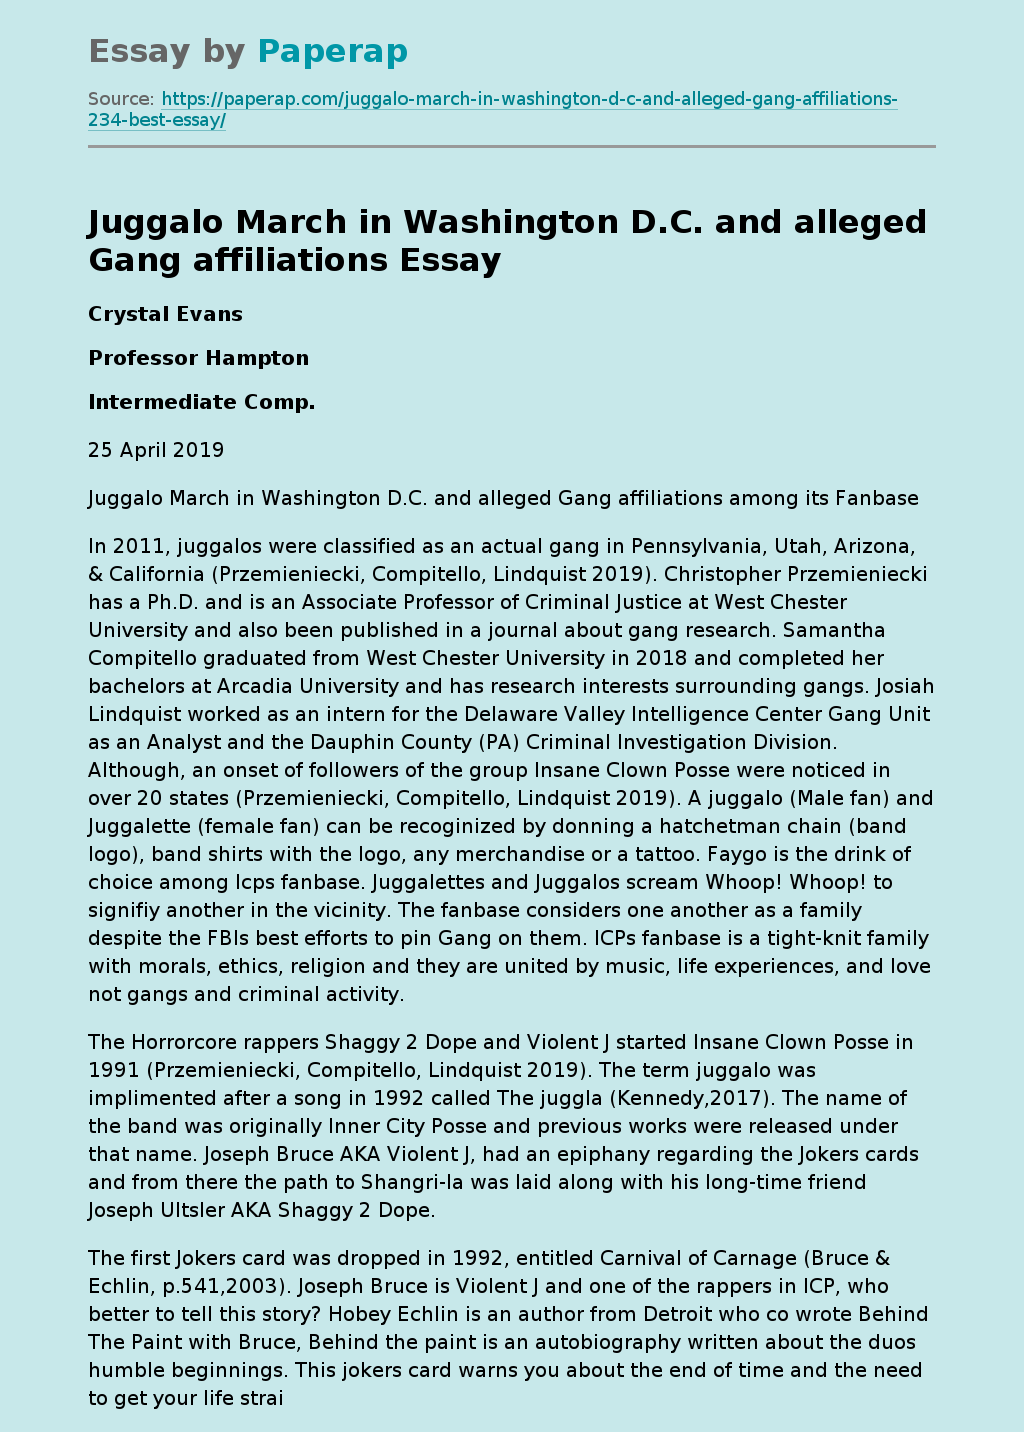 Juggalo March in Washington D.C. and alleged Gang affiliations